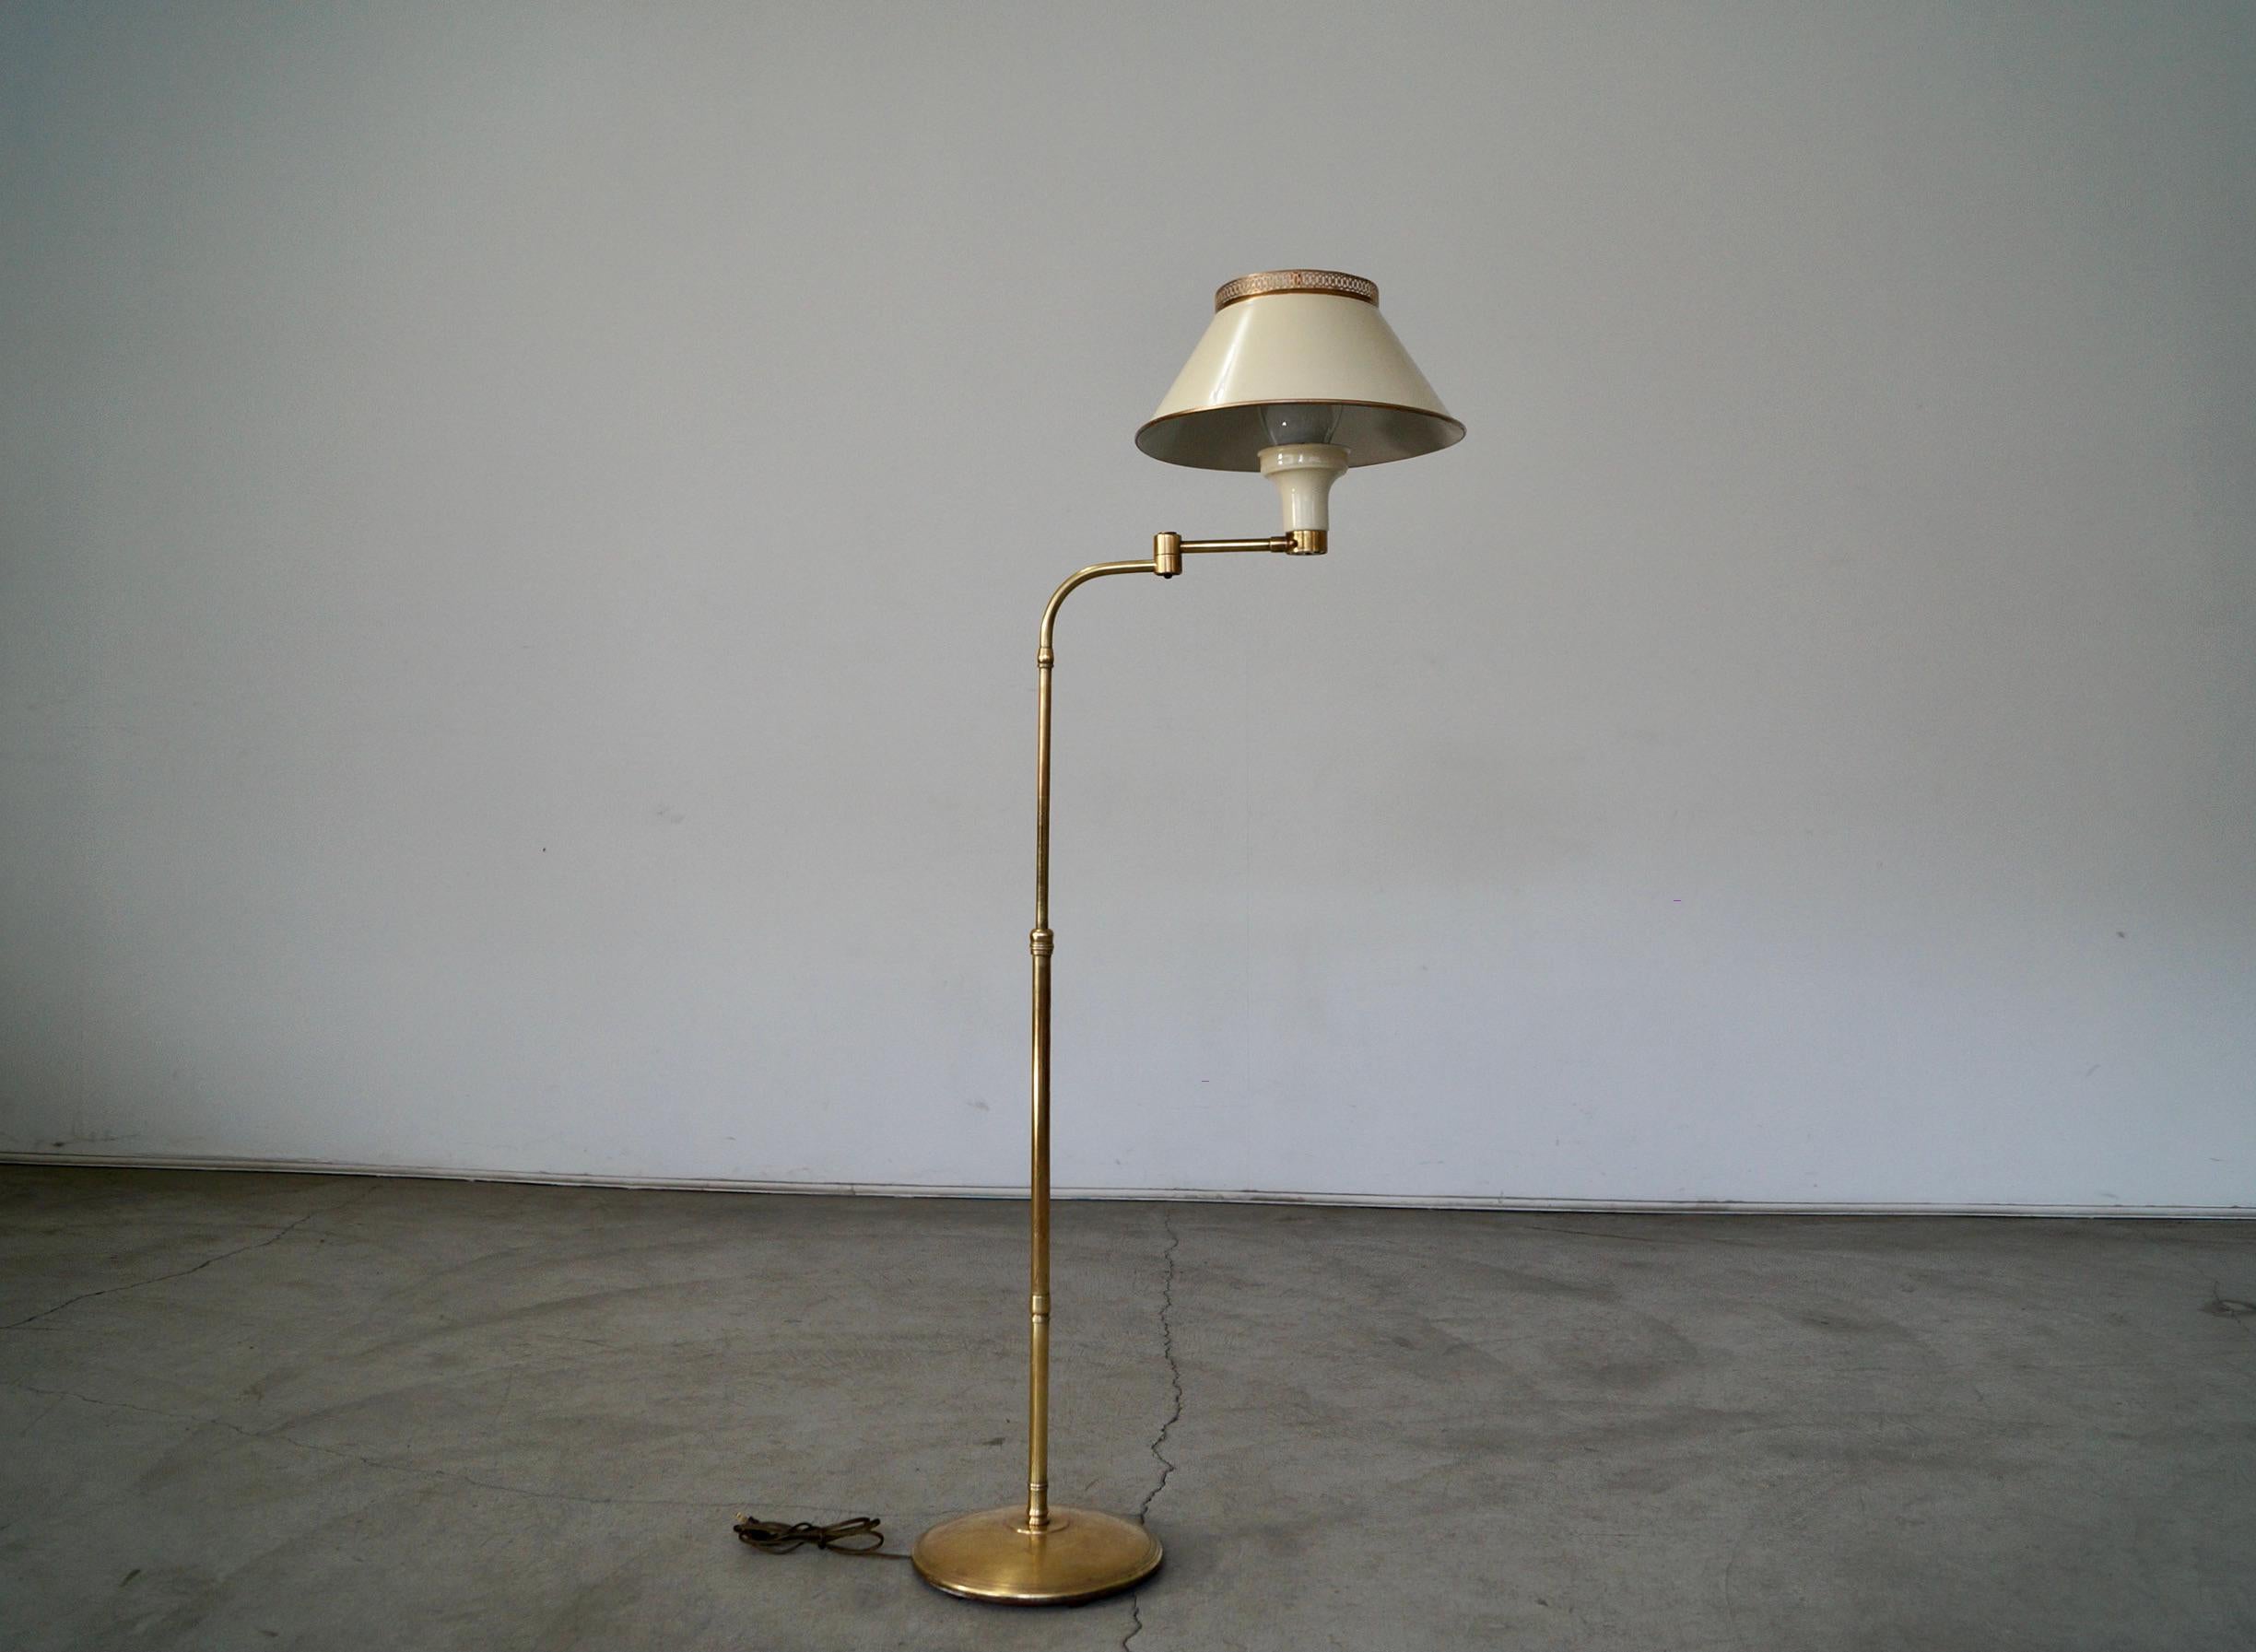 Vintage Mid-century Modern floor lamp for sale. Made of solid brass, and fully restored. This lamp has been re-wired, and the brass has been polished. The shade has been refinished in antique white and gold trims. It’s from the 1940’s, and is a